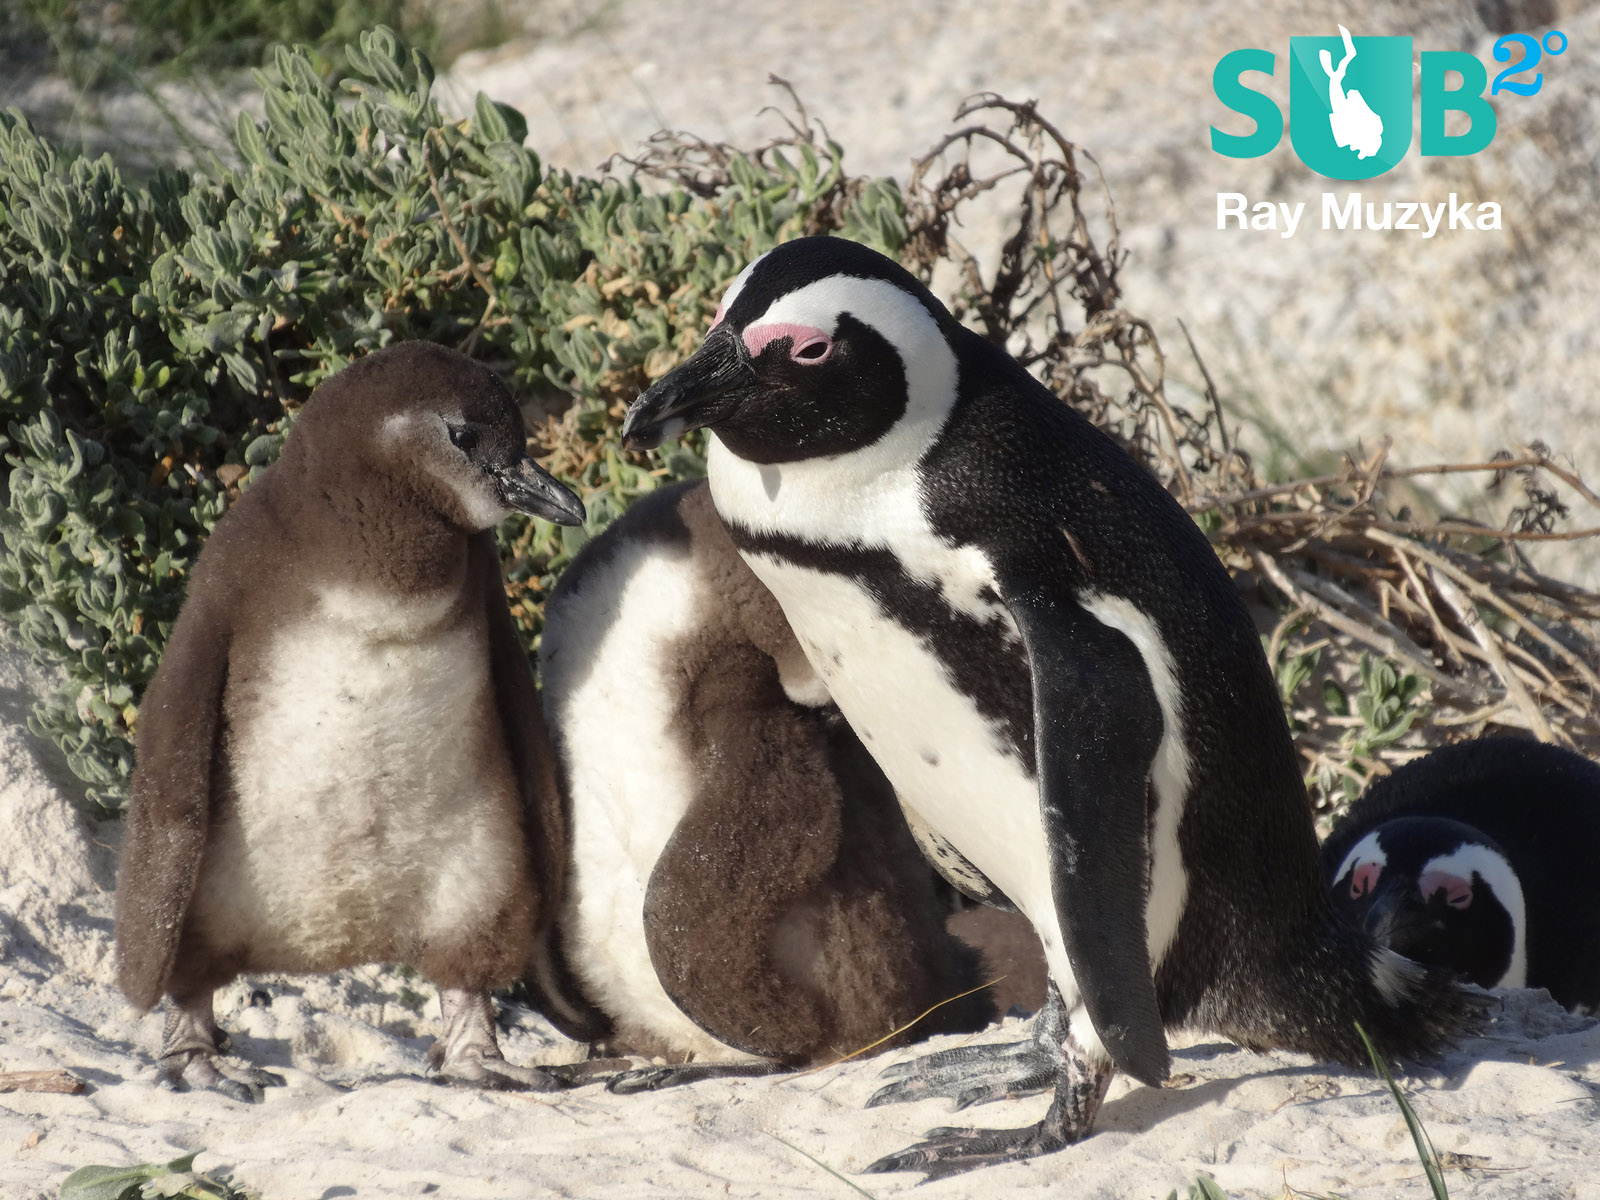 Penguin with two large chicks at nesting site in Boulders Beach, South Africa.